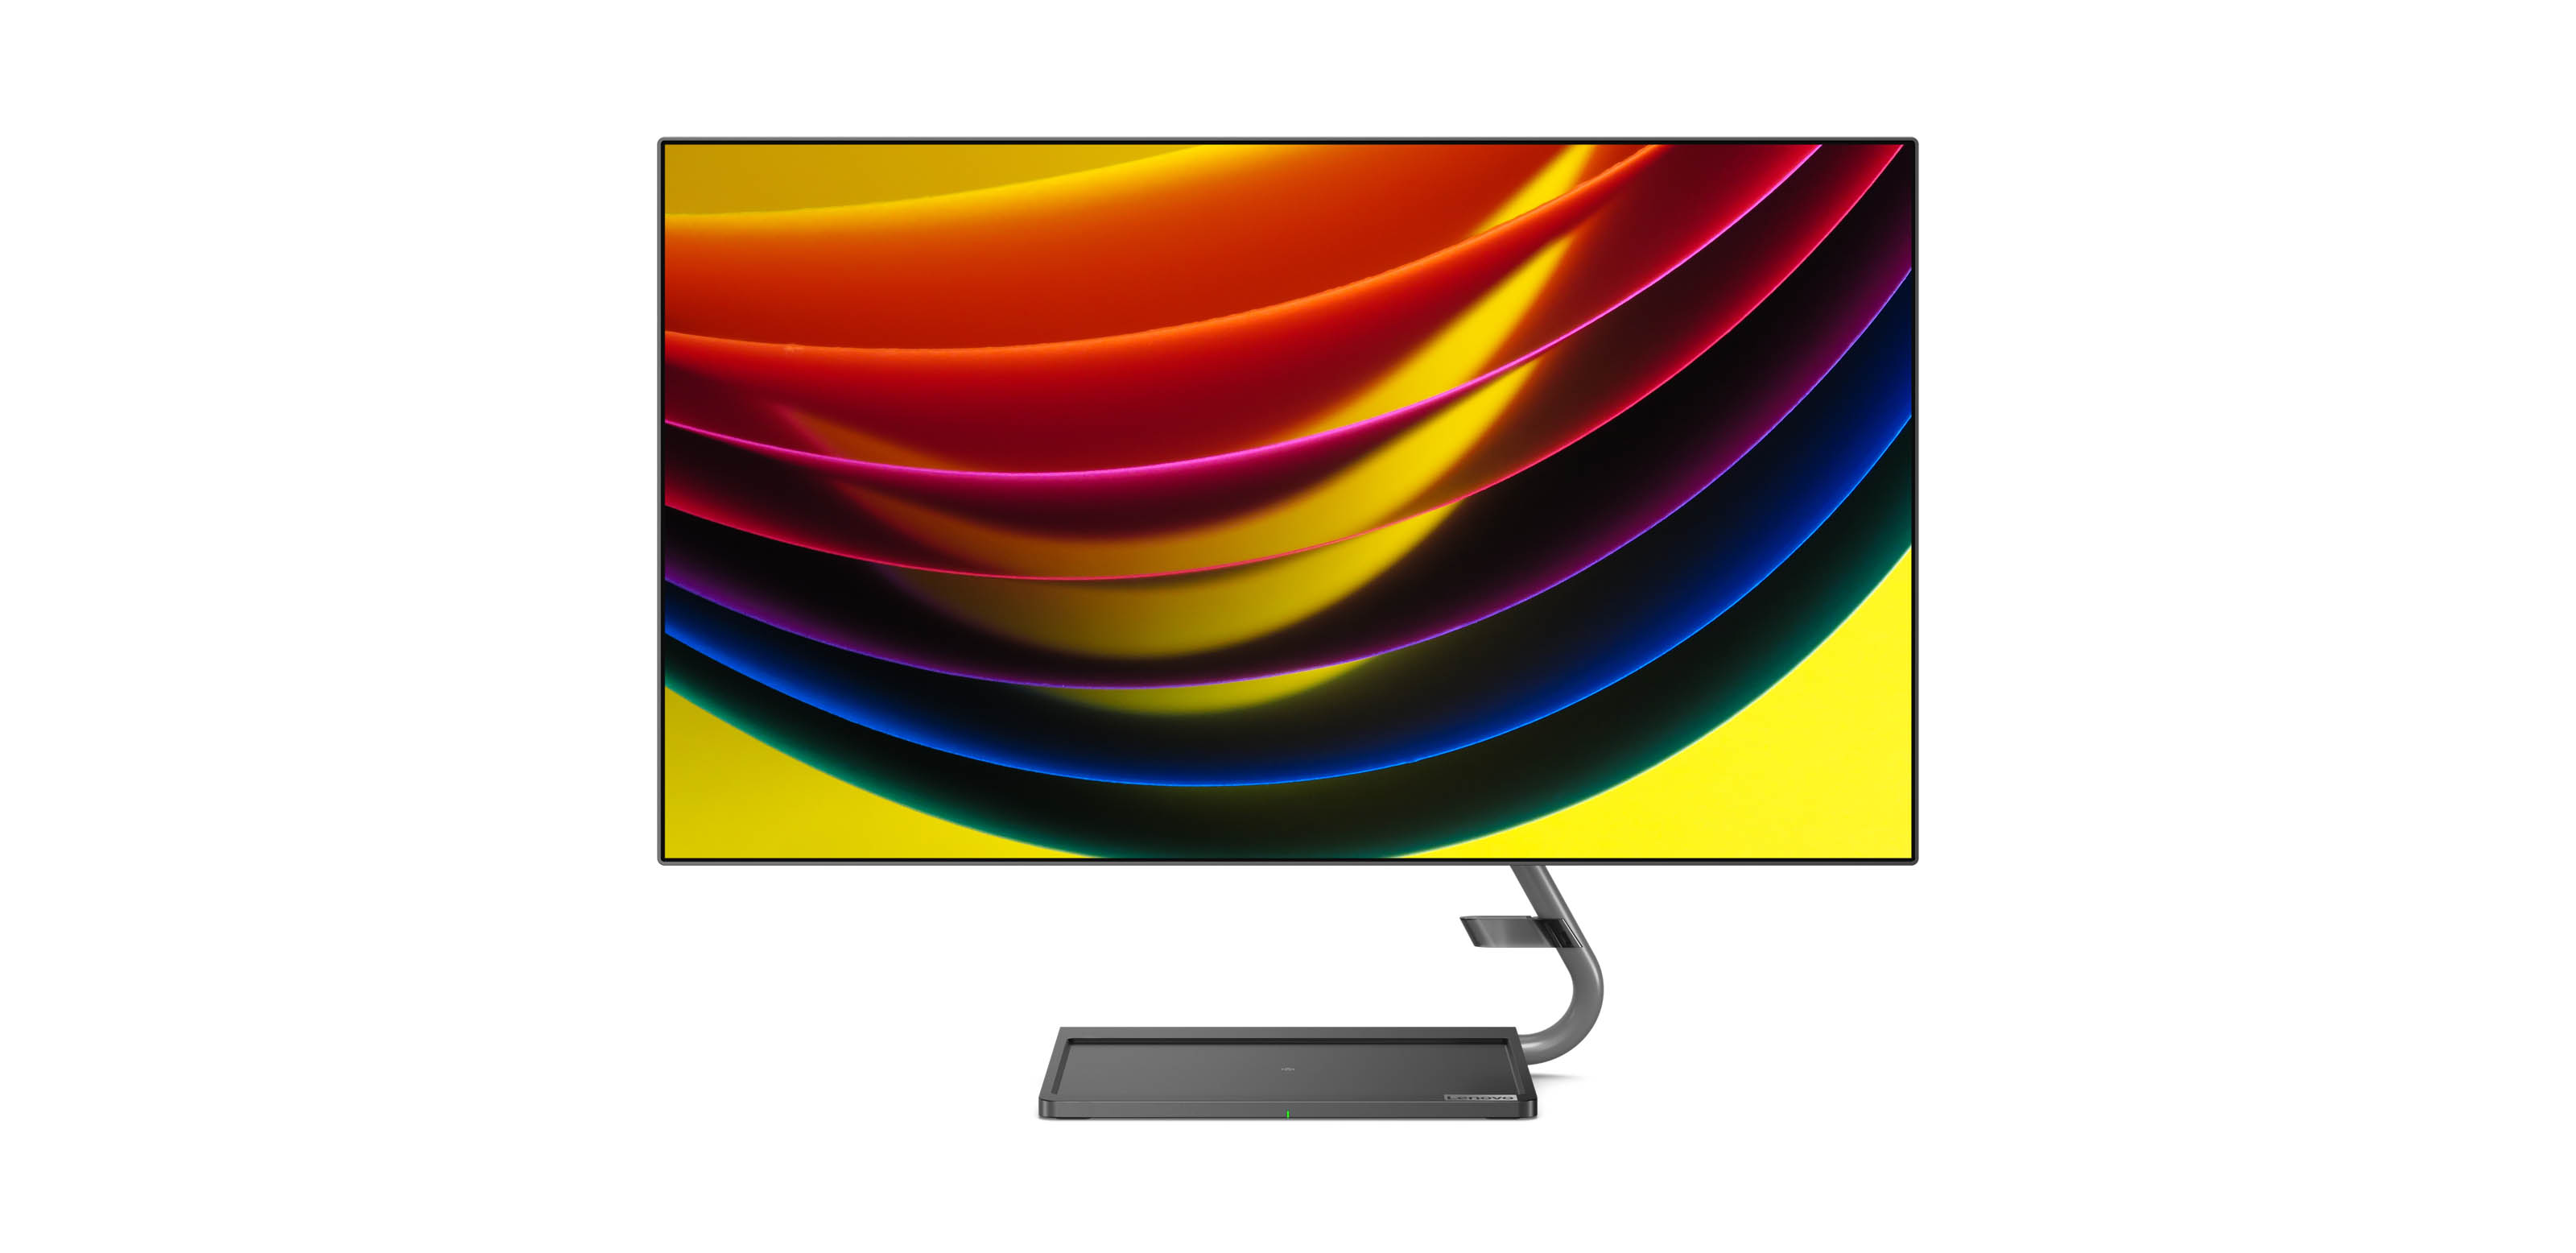 Photo of the Lenovo Qreator 27 Monitor, facing forward with streams of colors on its display